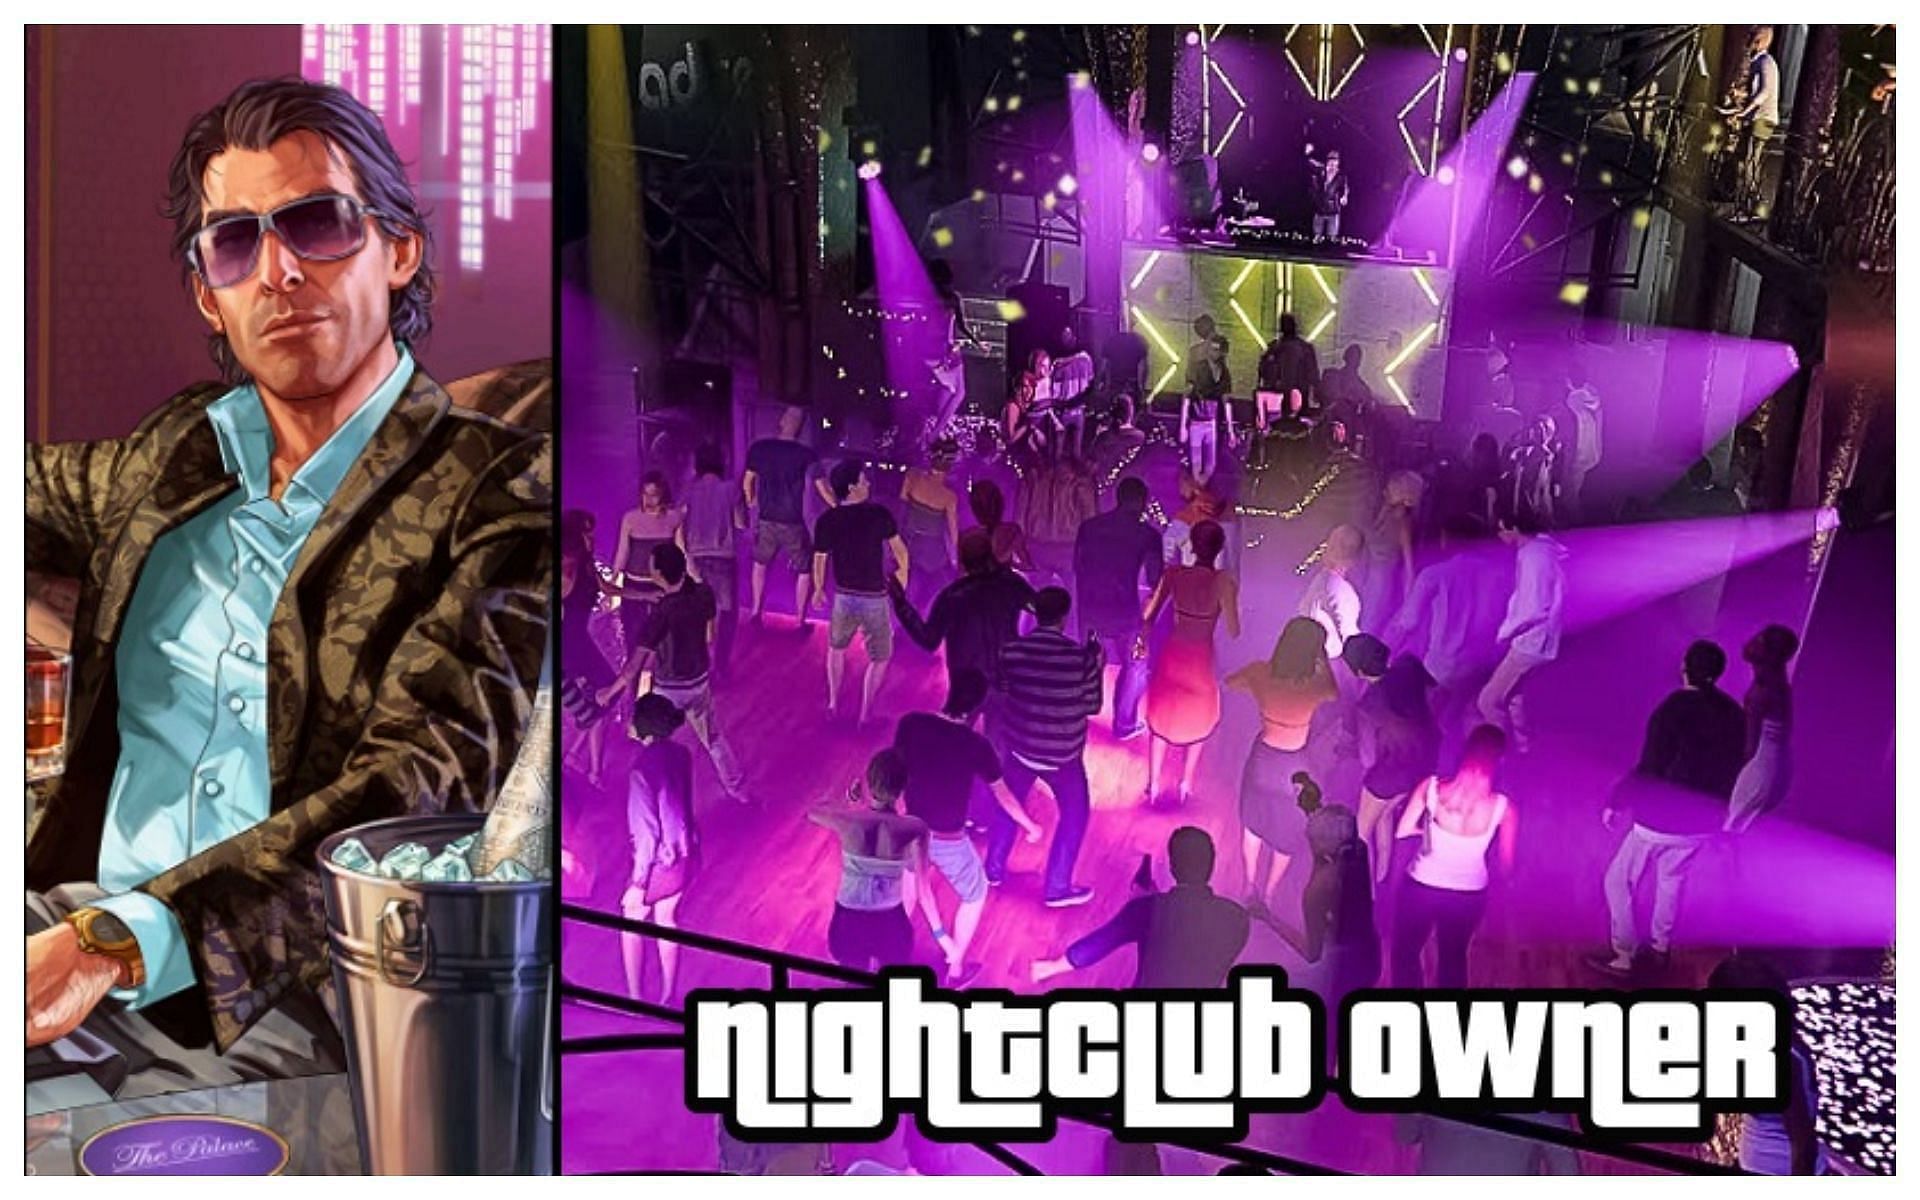 Career Builder allows players to become a Nightclub owner (Image via Rockstar Games)